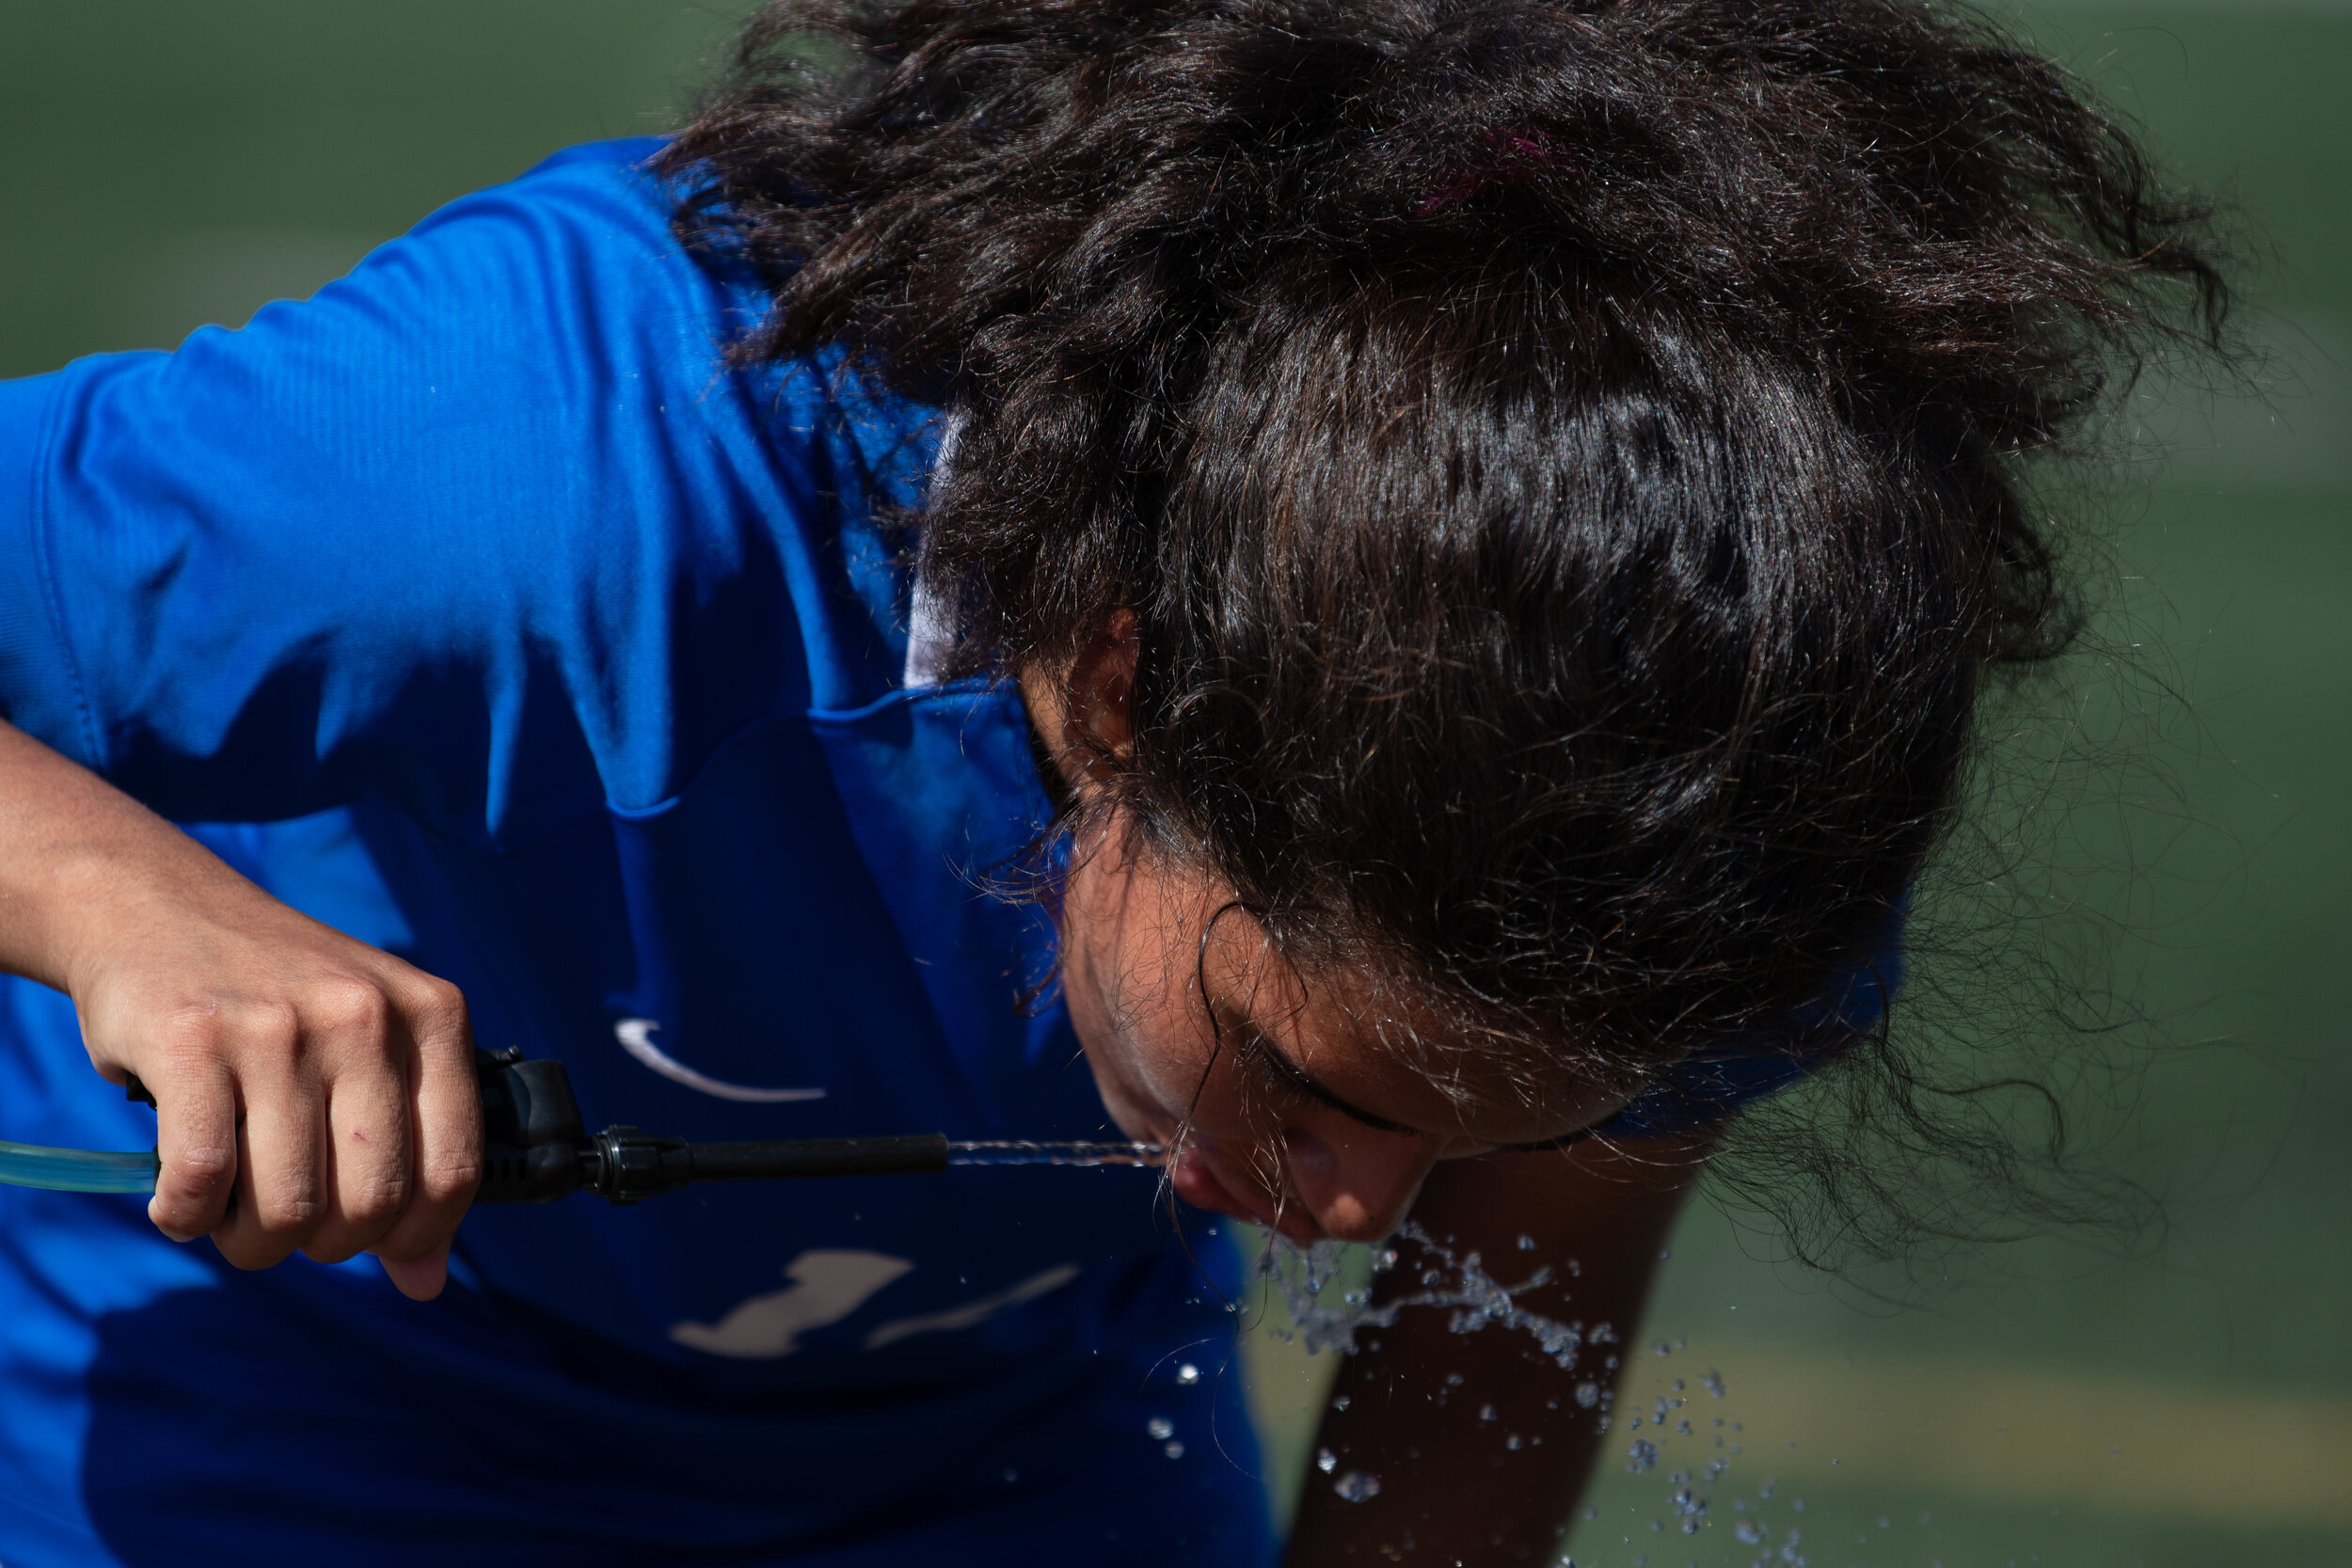  Prudence Vargas of the Santa Monica College woman's soccer team takes a long drink right at the beginning of half-time on the Santa Monica College Corsair Field in Santa Monica, Calif. on September 10, 2021. The match against Chaffey is their third 